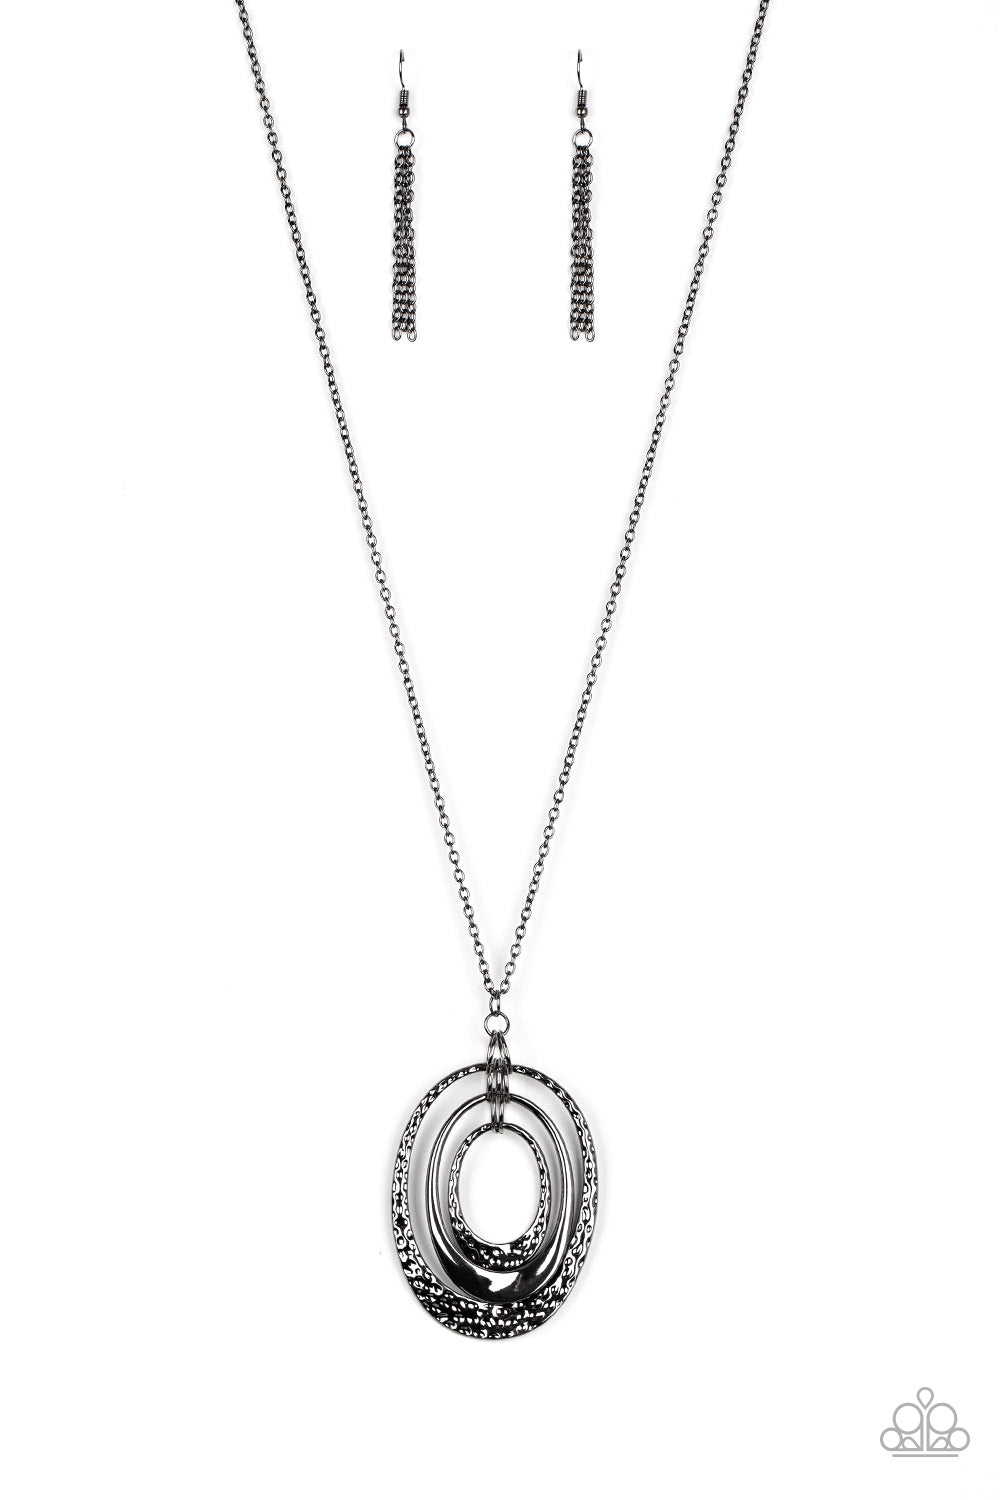 Dizzying Decor Paparazzi Accessories Necklace with Earrings - Black